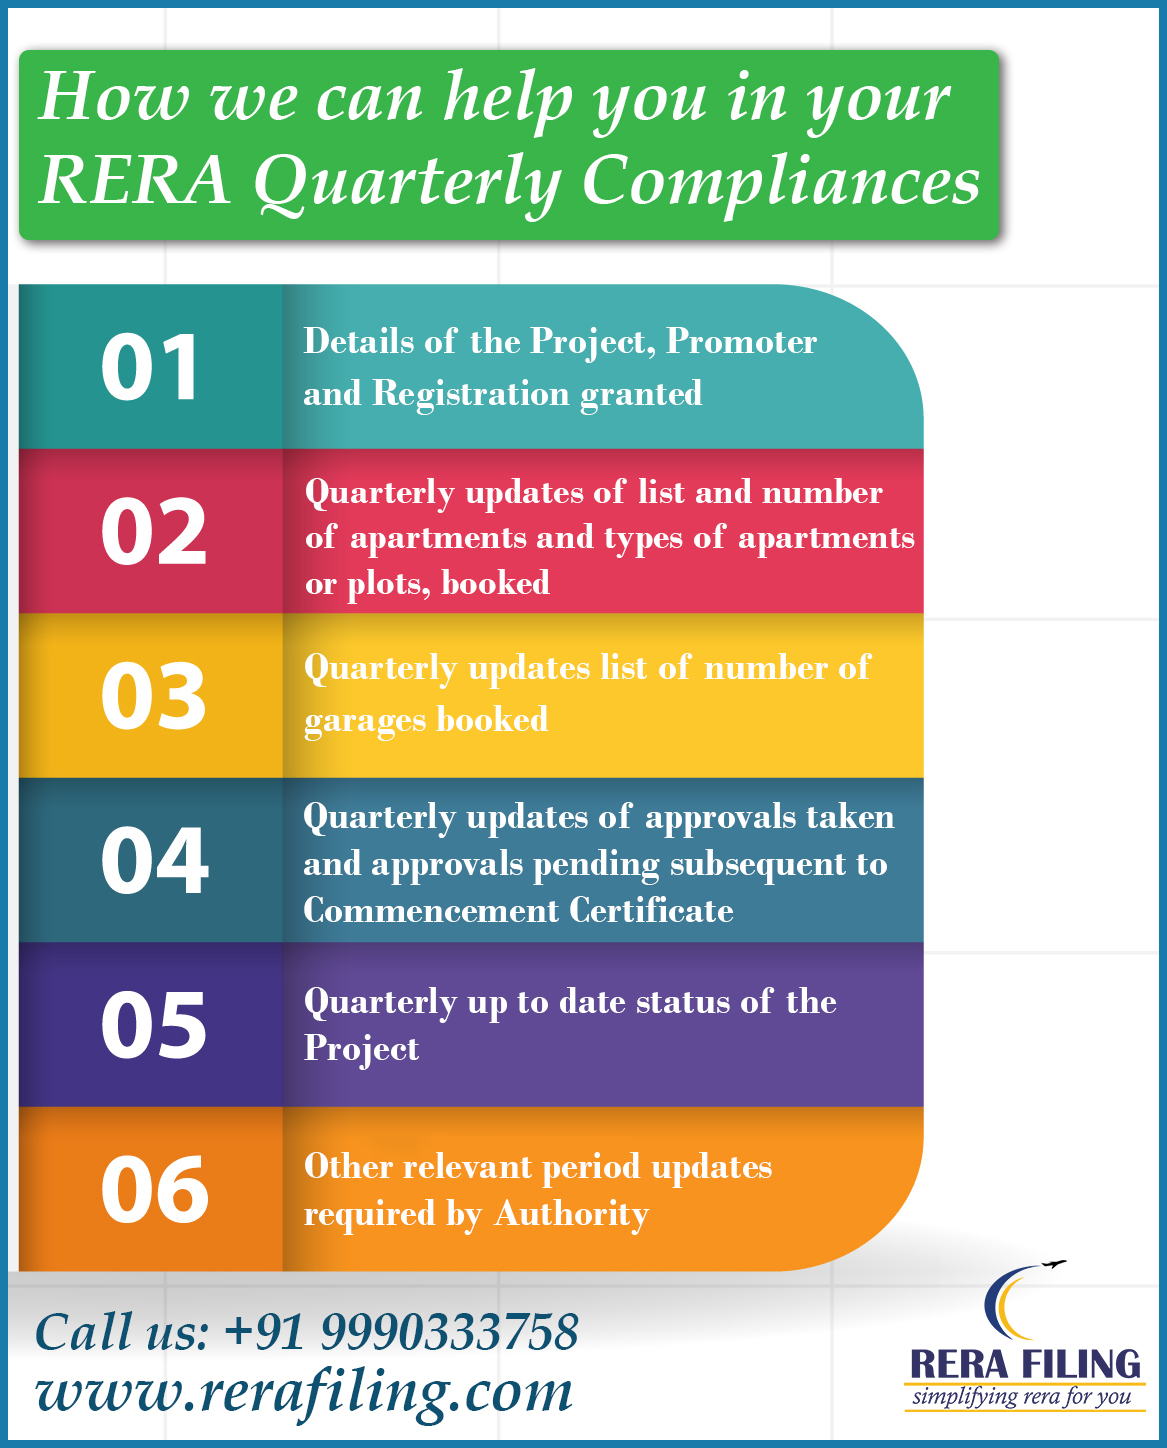 How we can help you in your RERA quarterly compliances 